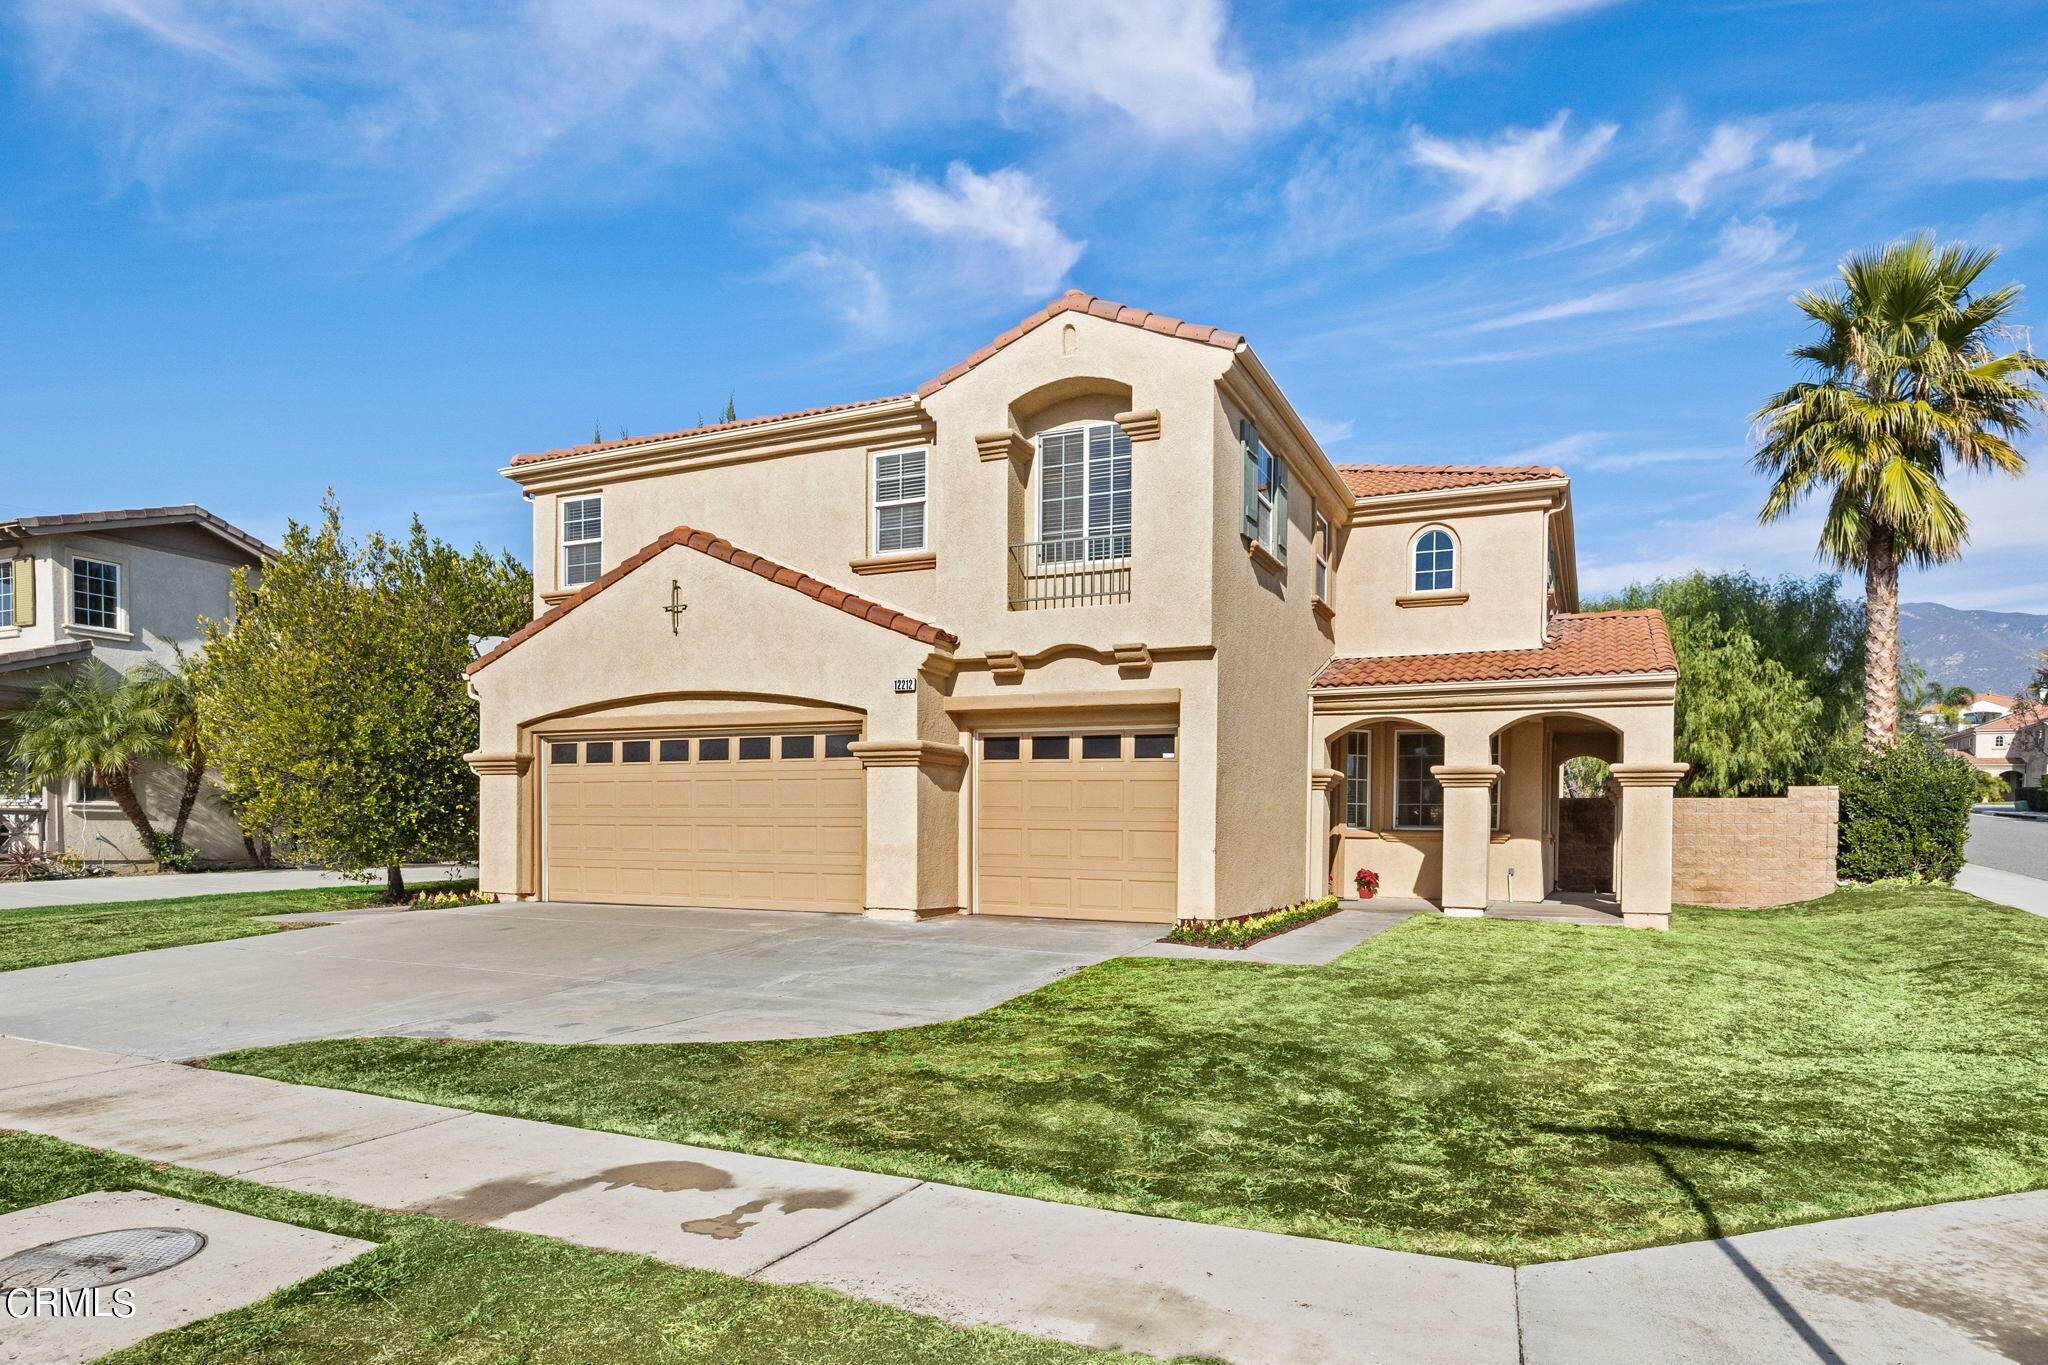 3. Single Family Homes for Sale at 12212 Clydesdale Drive Rancho Cucamonga, California 91739 United States